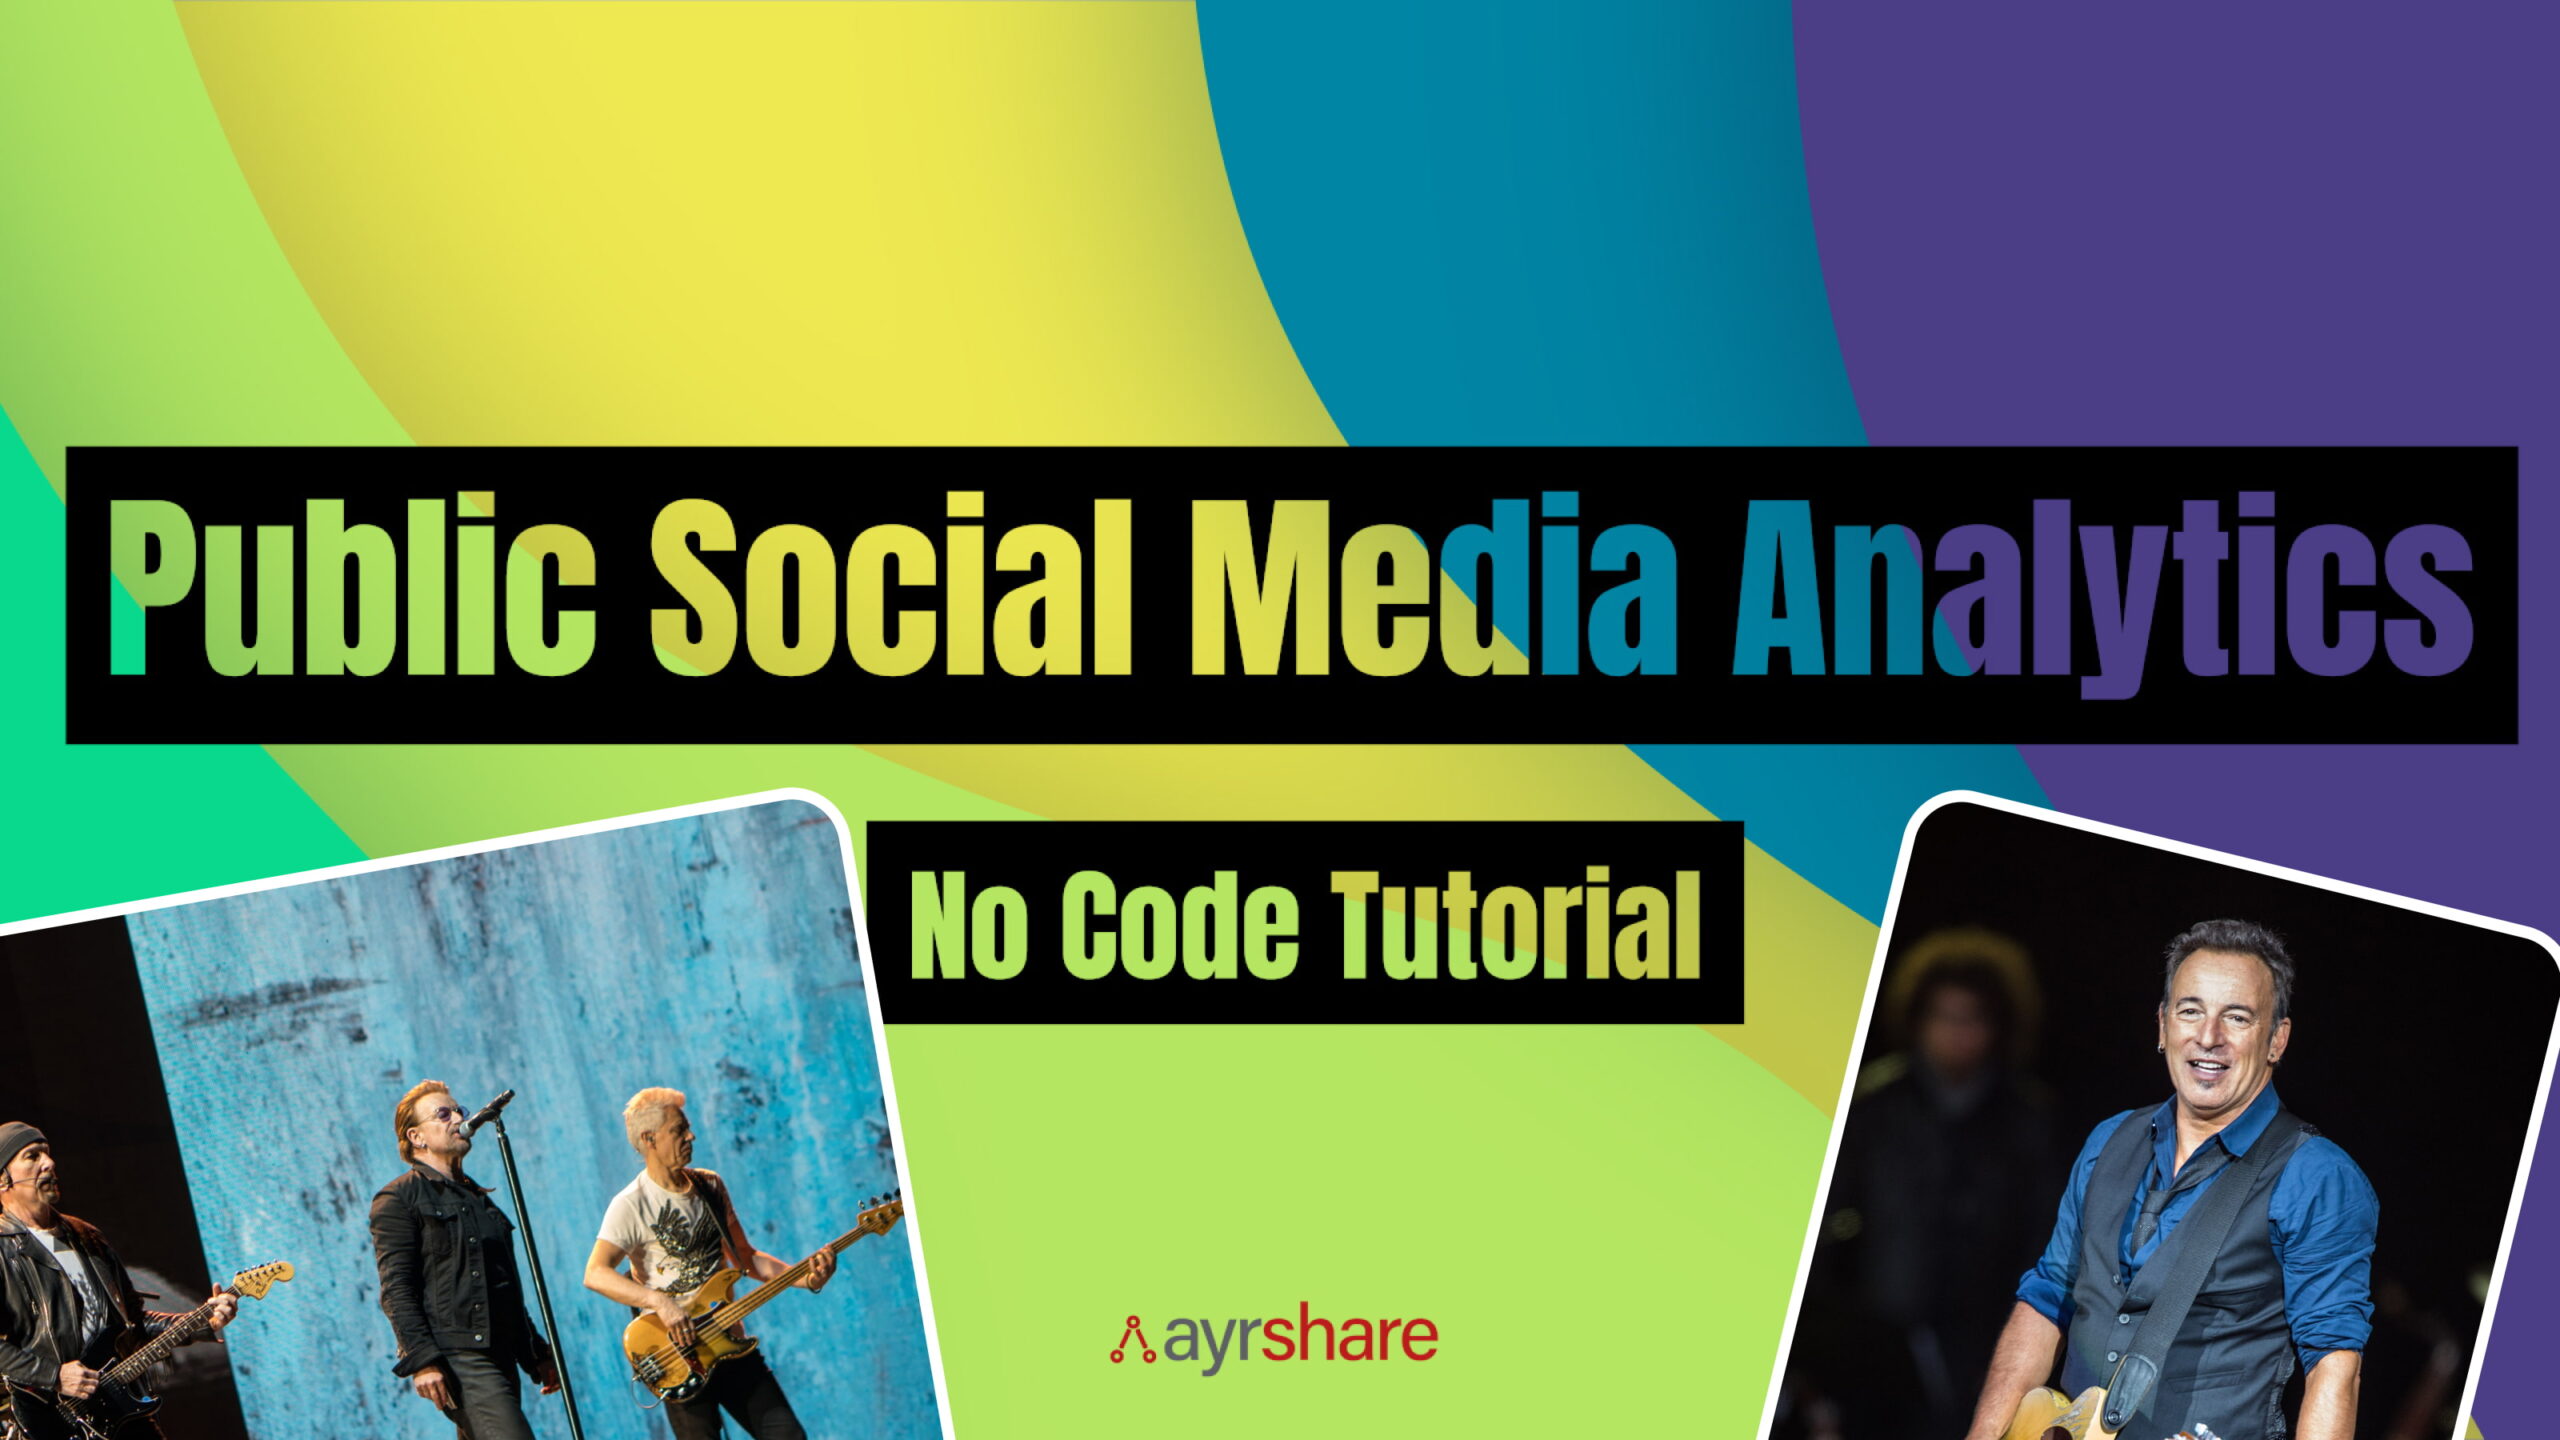 Colorful graphic promoting a no code tutorial for public social media analytics.